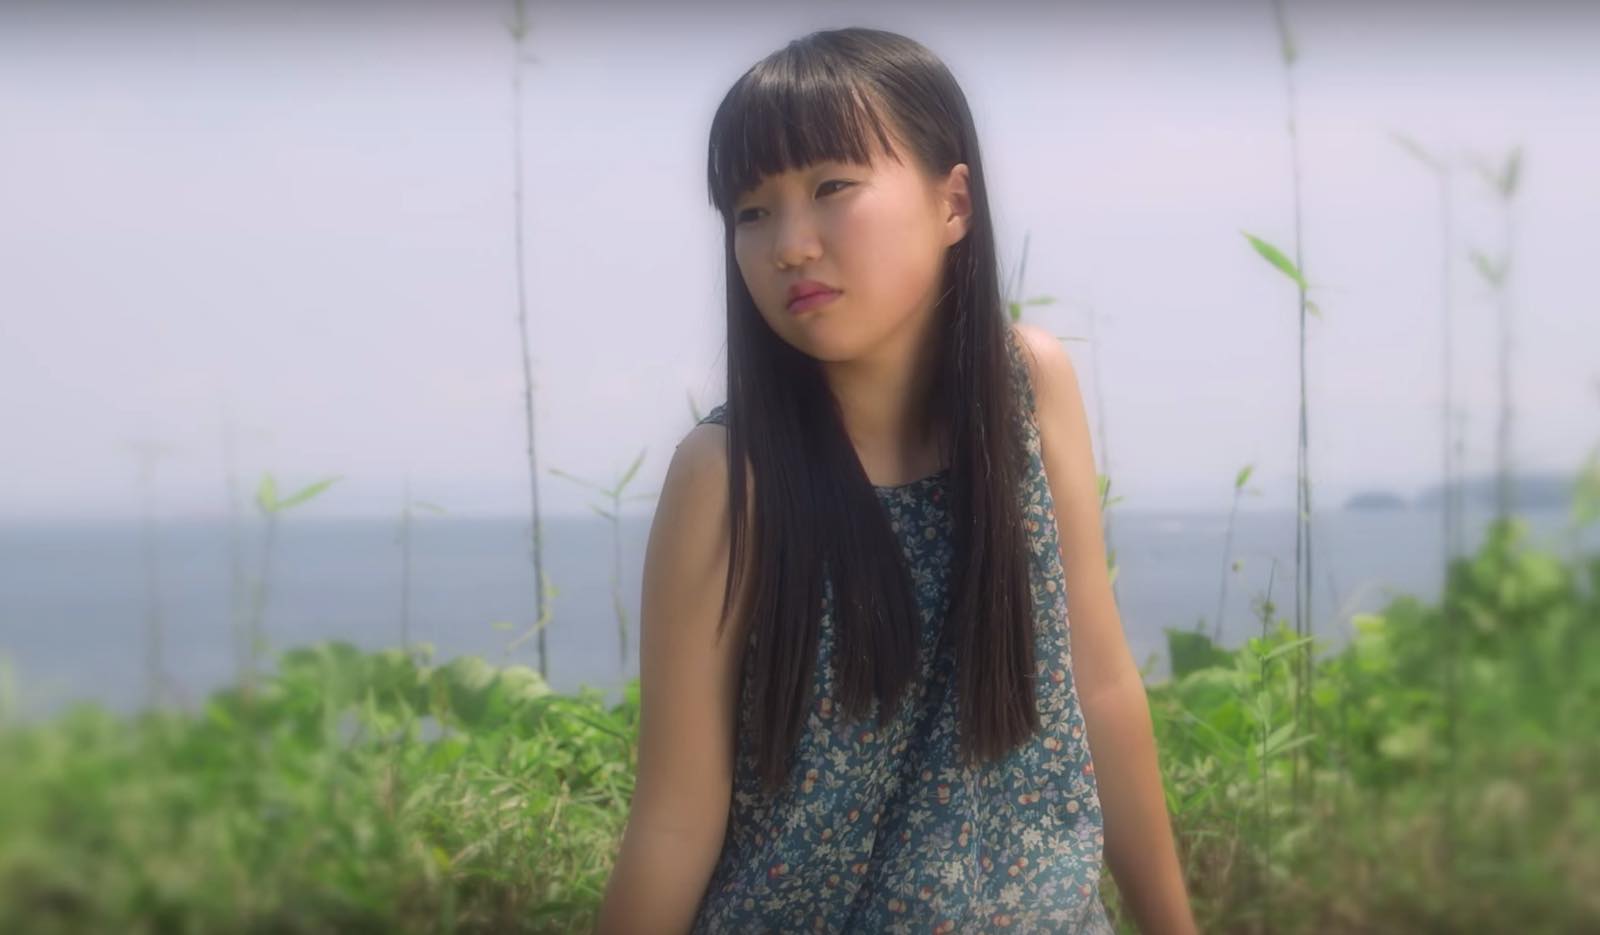 Peach sugar snow Murmurs Deep Thoughts in the Gentle MV for “Karisome no Namida”